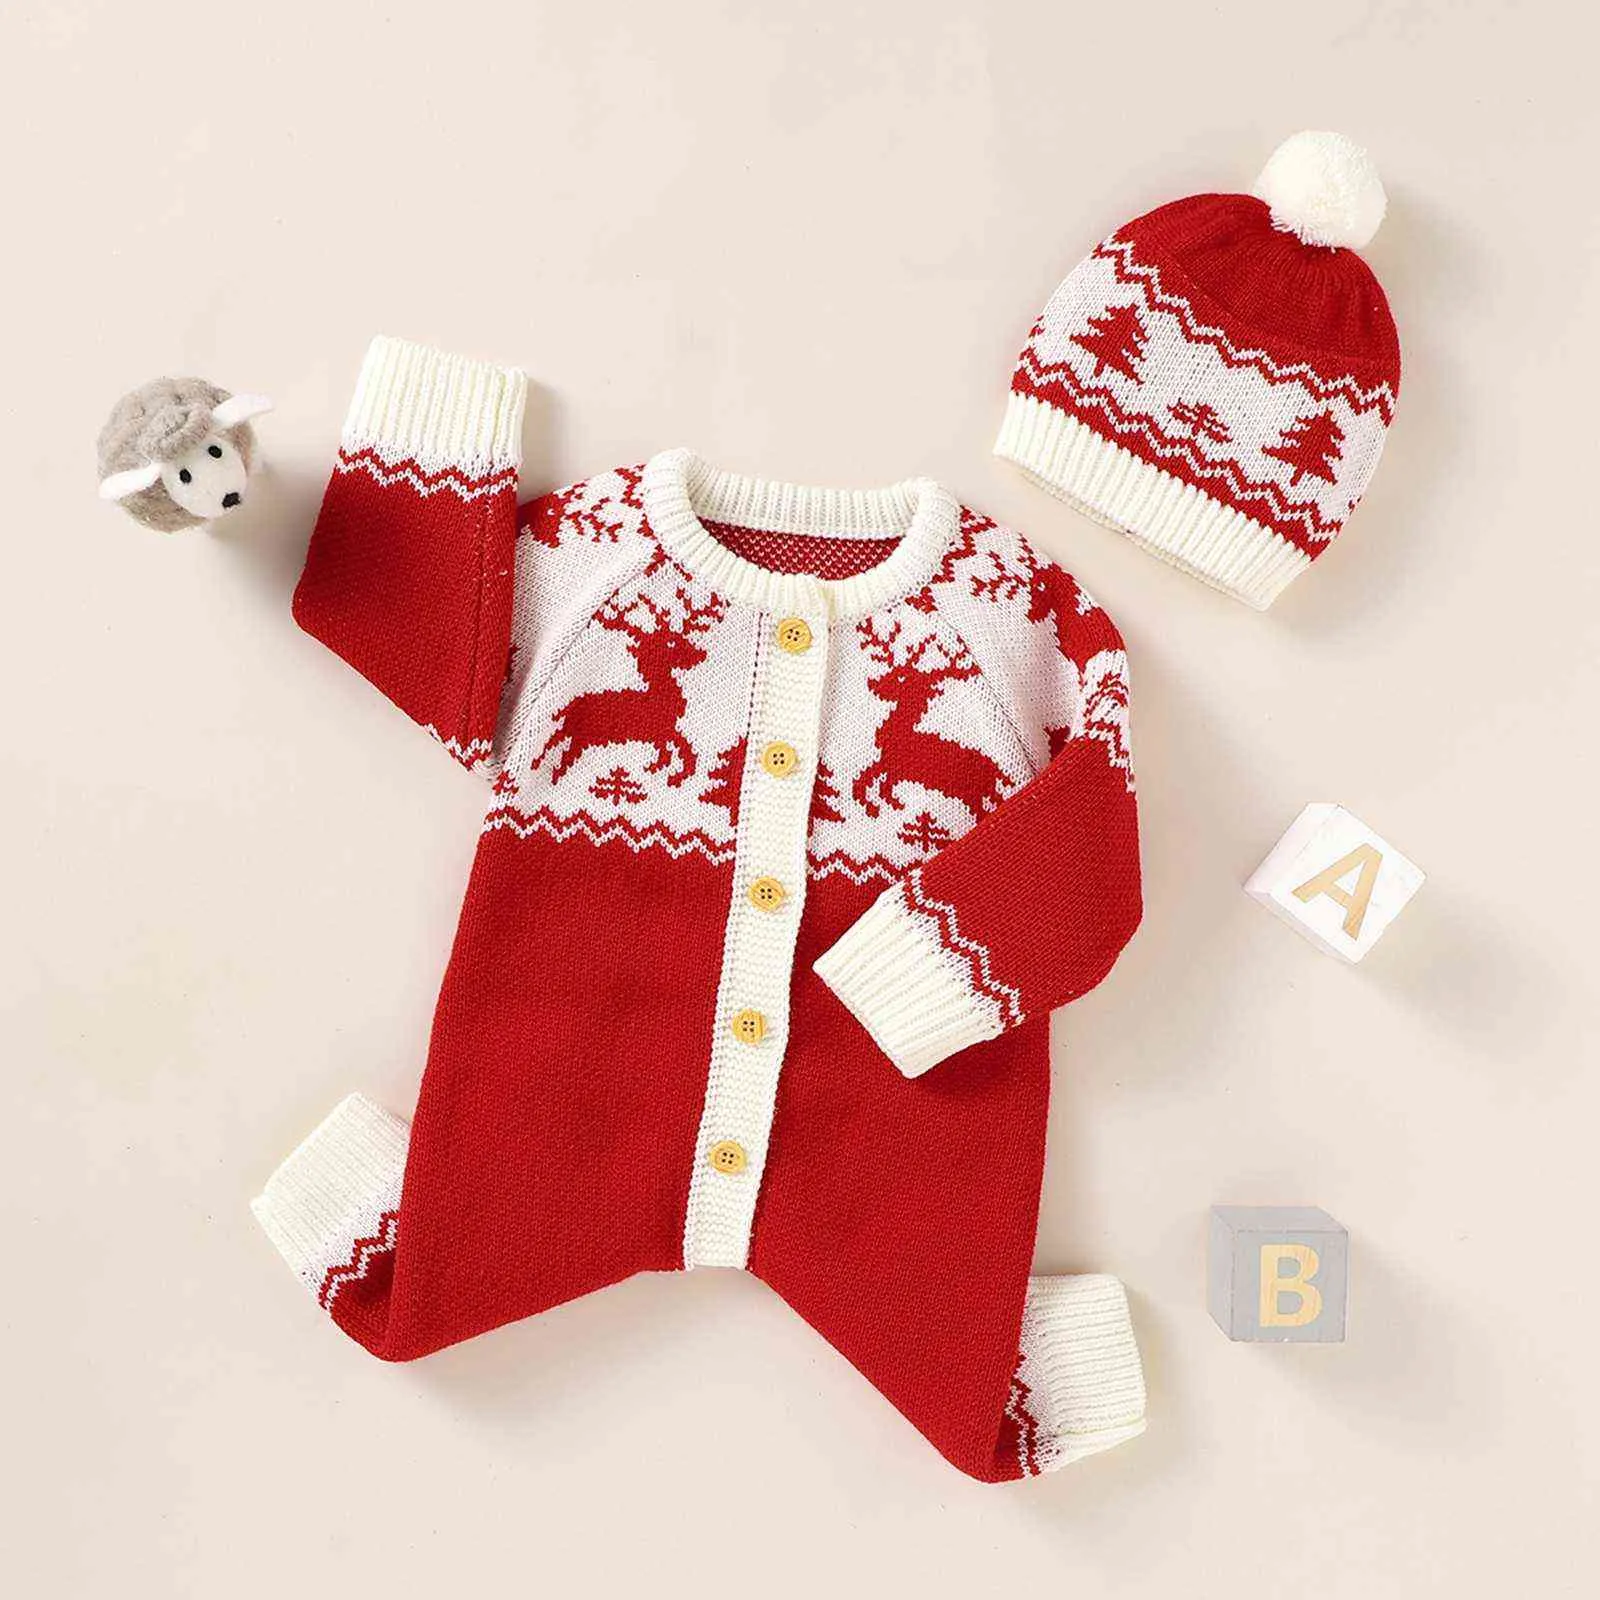 Ma&Baby 0-18m born Infant Baby Girls Boys Christmas Costumes Knitted Long Sleeve Deer Romper Jumpsuit Warm Xmas Clothes DD43 211101